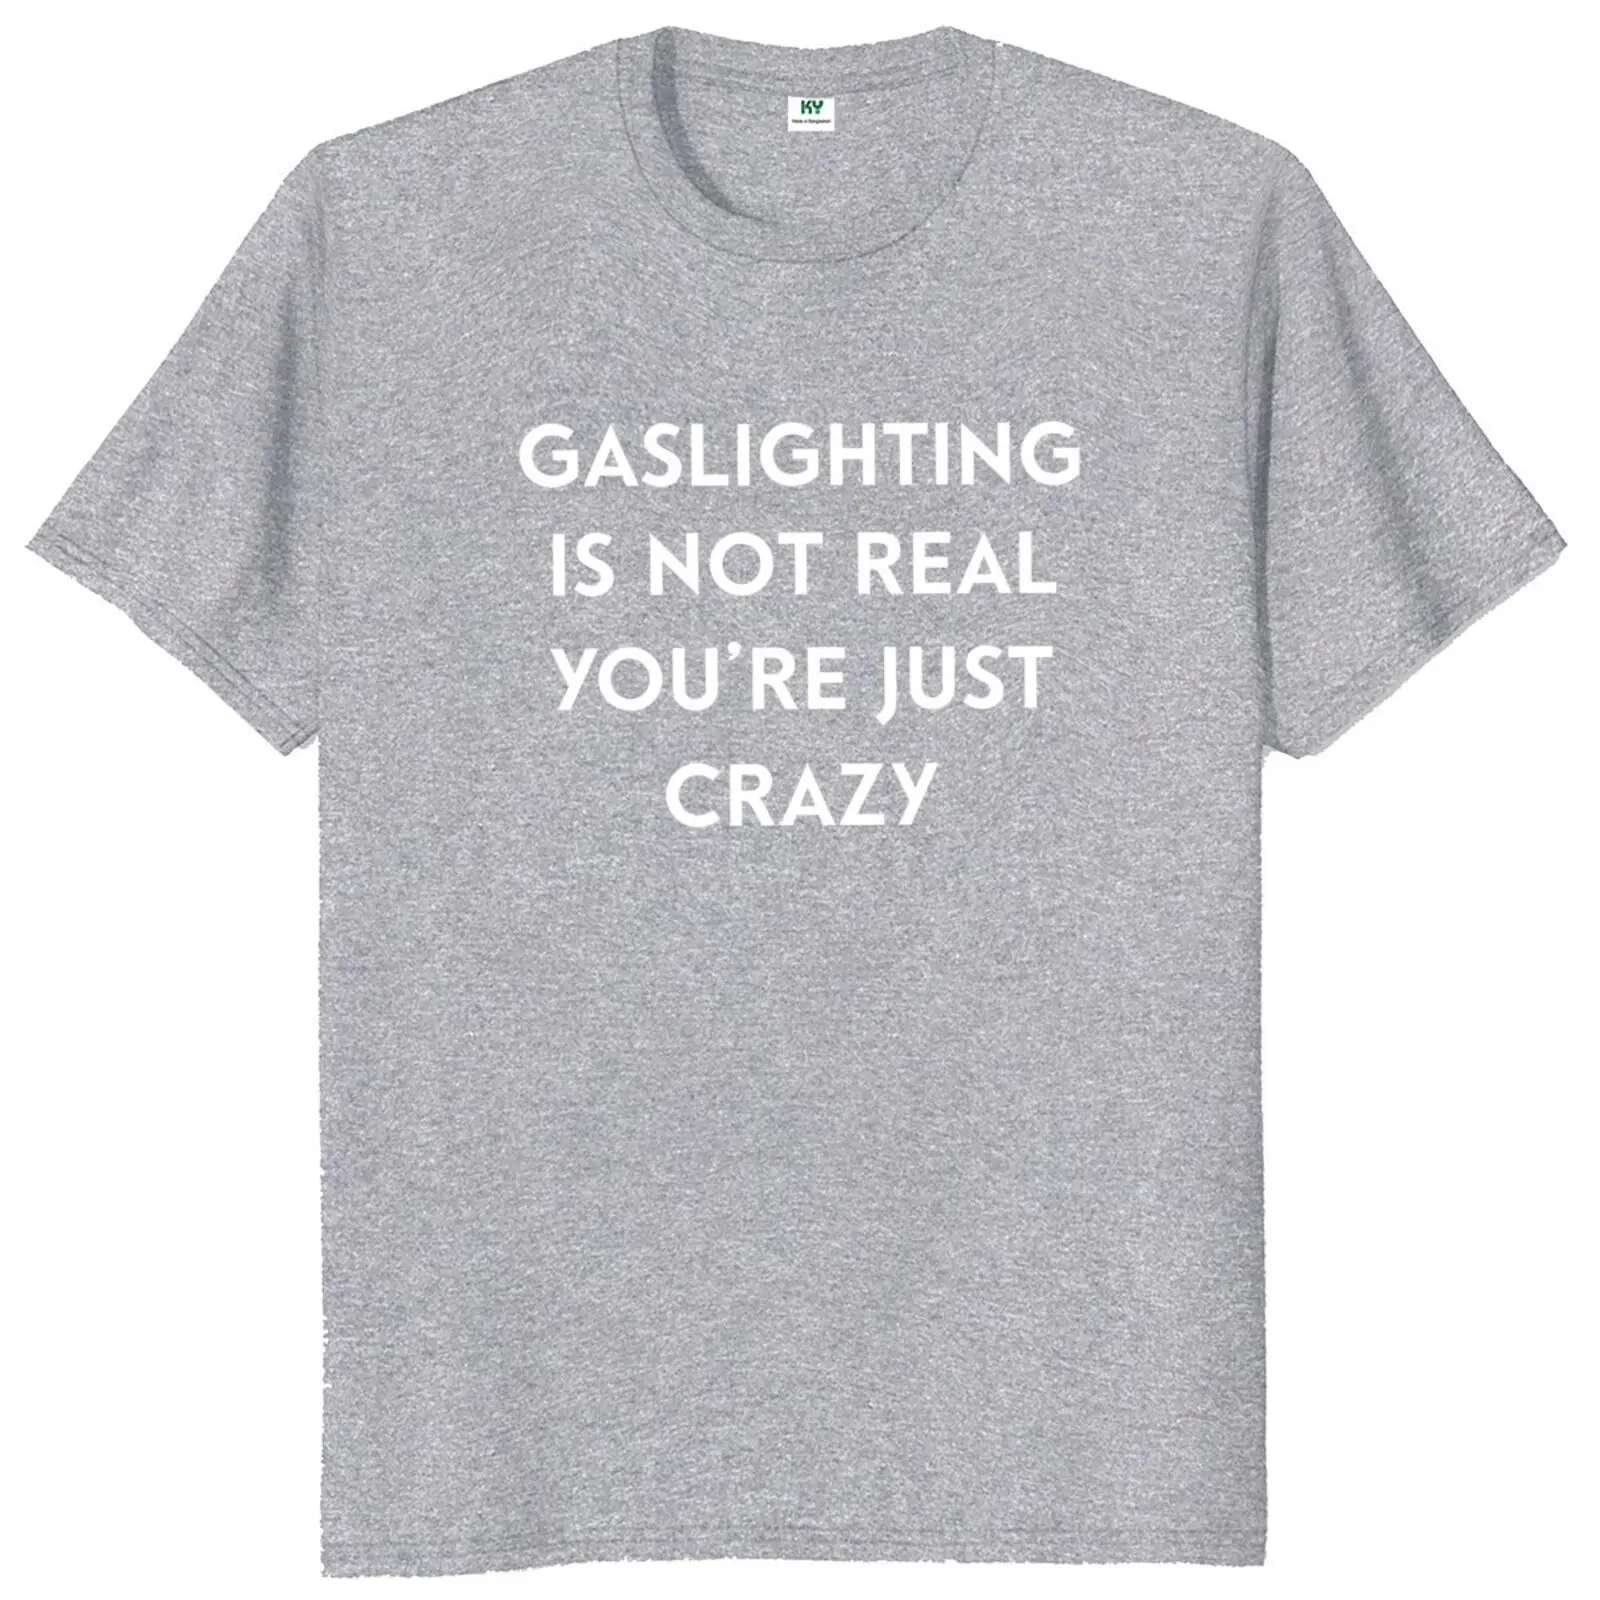 Gaslighting Is Not Real You're Just Crazy T-Shirt 2022 New Funny Memes Humor Jokes T Shirt Premium Summer Cotton Tee Tops